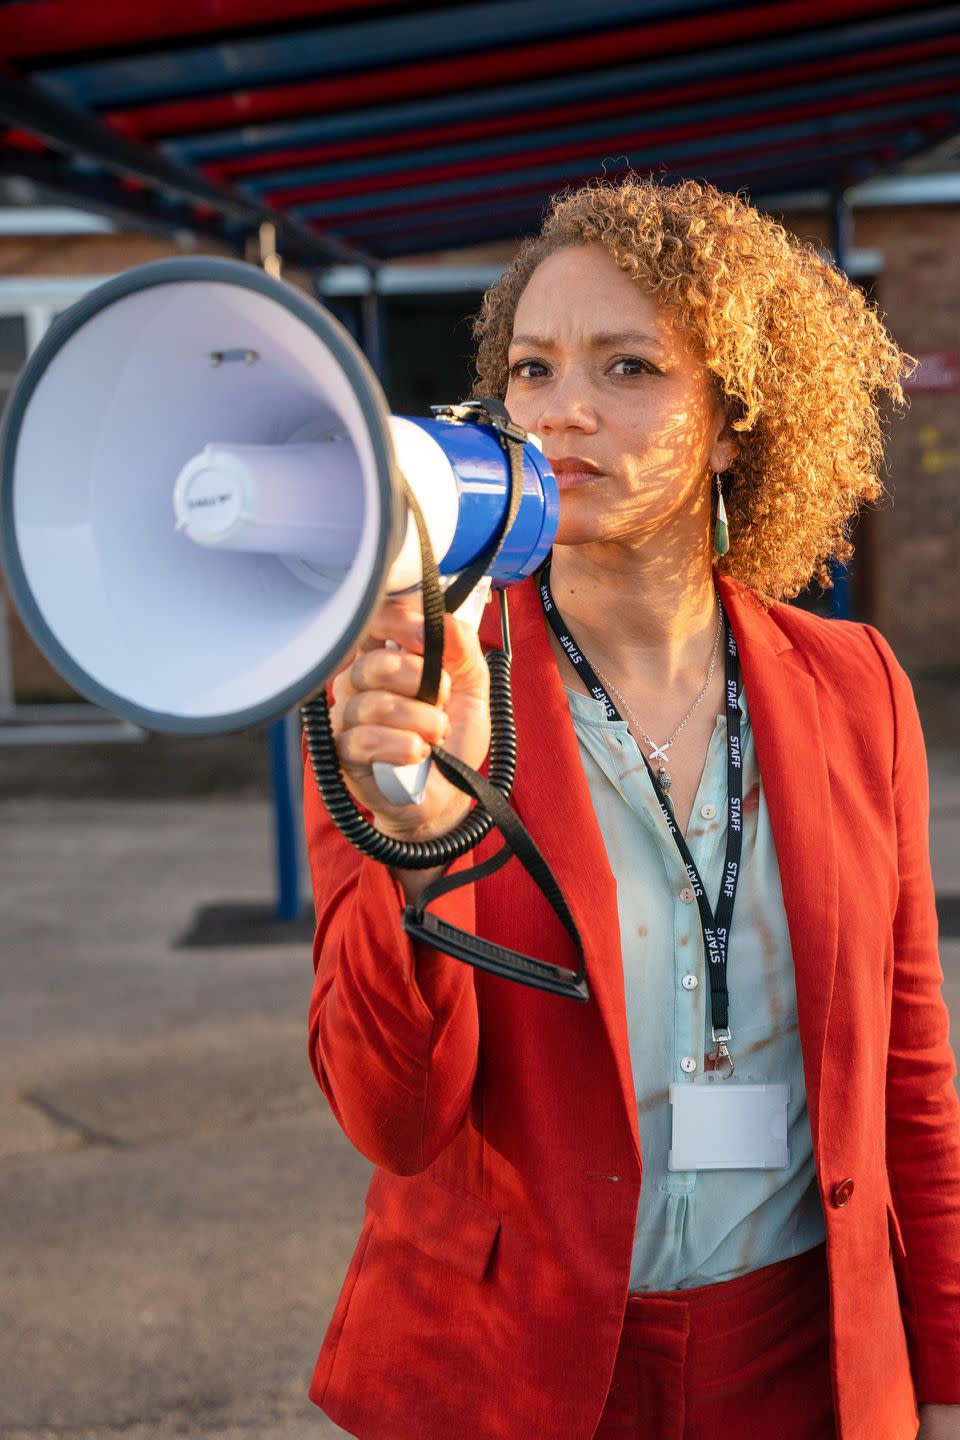 angela griffin holds a megaphone in waterloo road, embargo 0001 friday 25 november